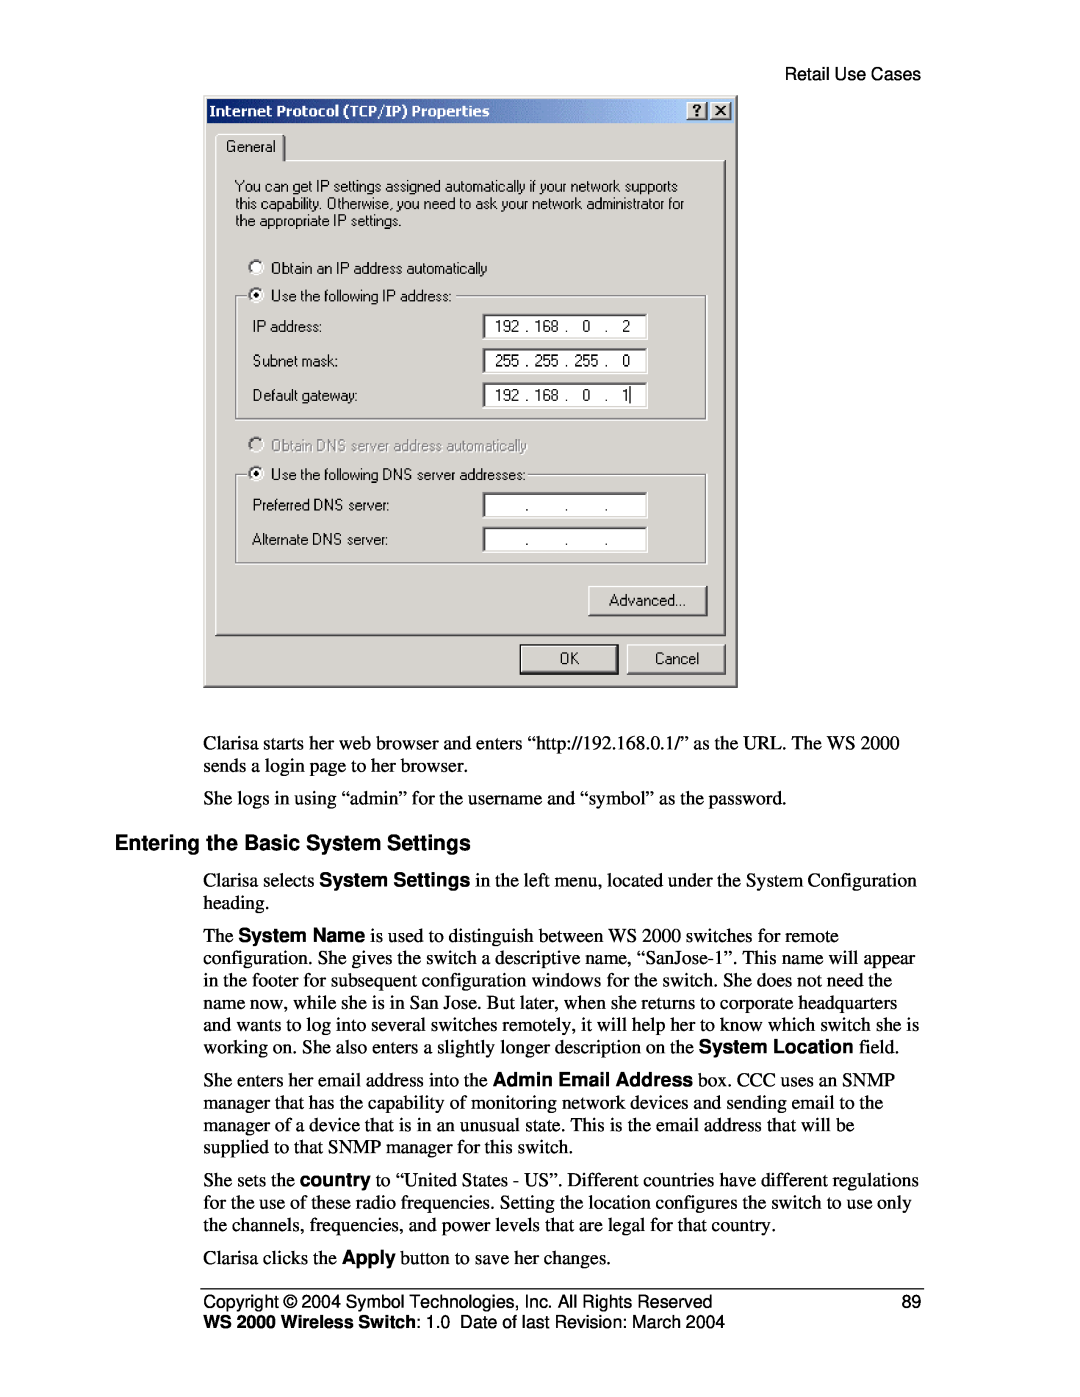 Symbol Technologies WS 2000 manual Entering the Basic System Settings 